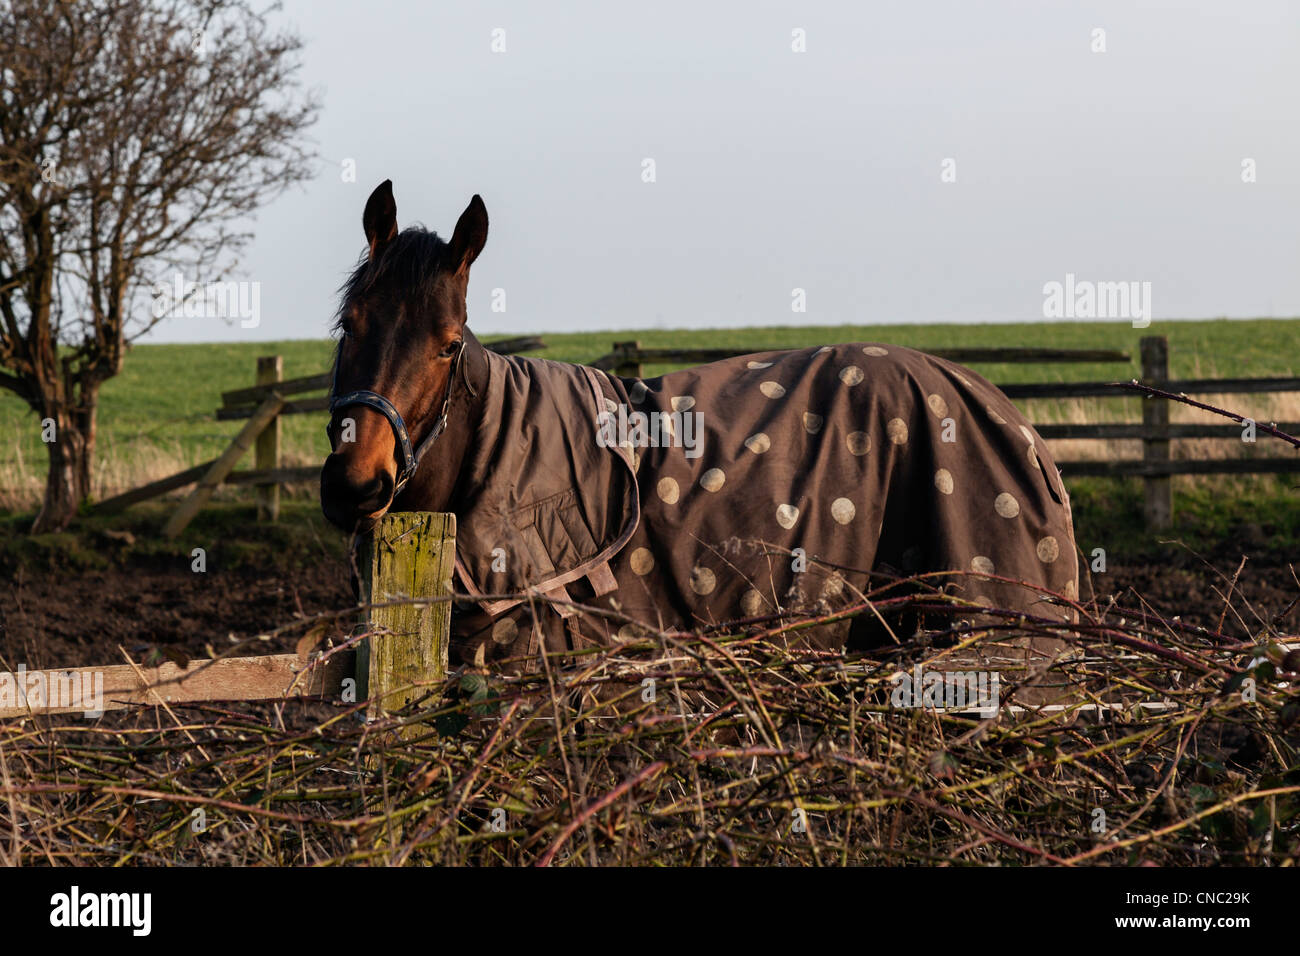 Horse in a field with wistful expression wearing a spotty blanket on this bright March day Stock Photo